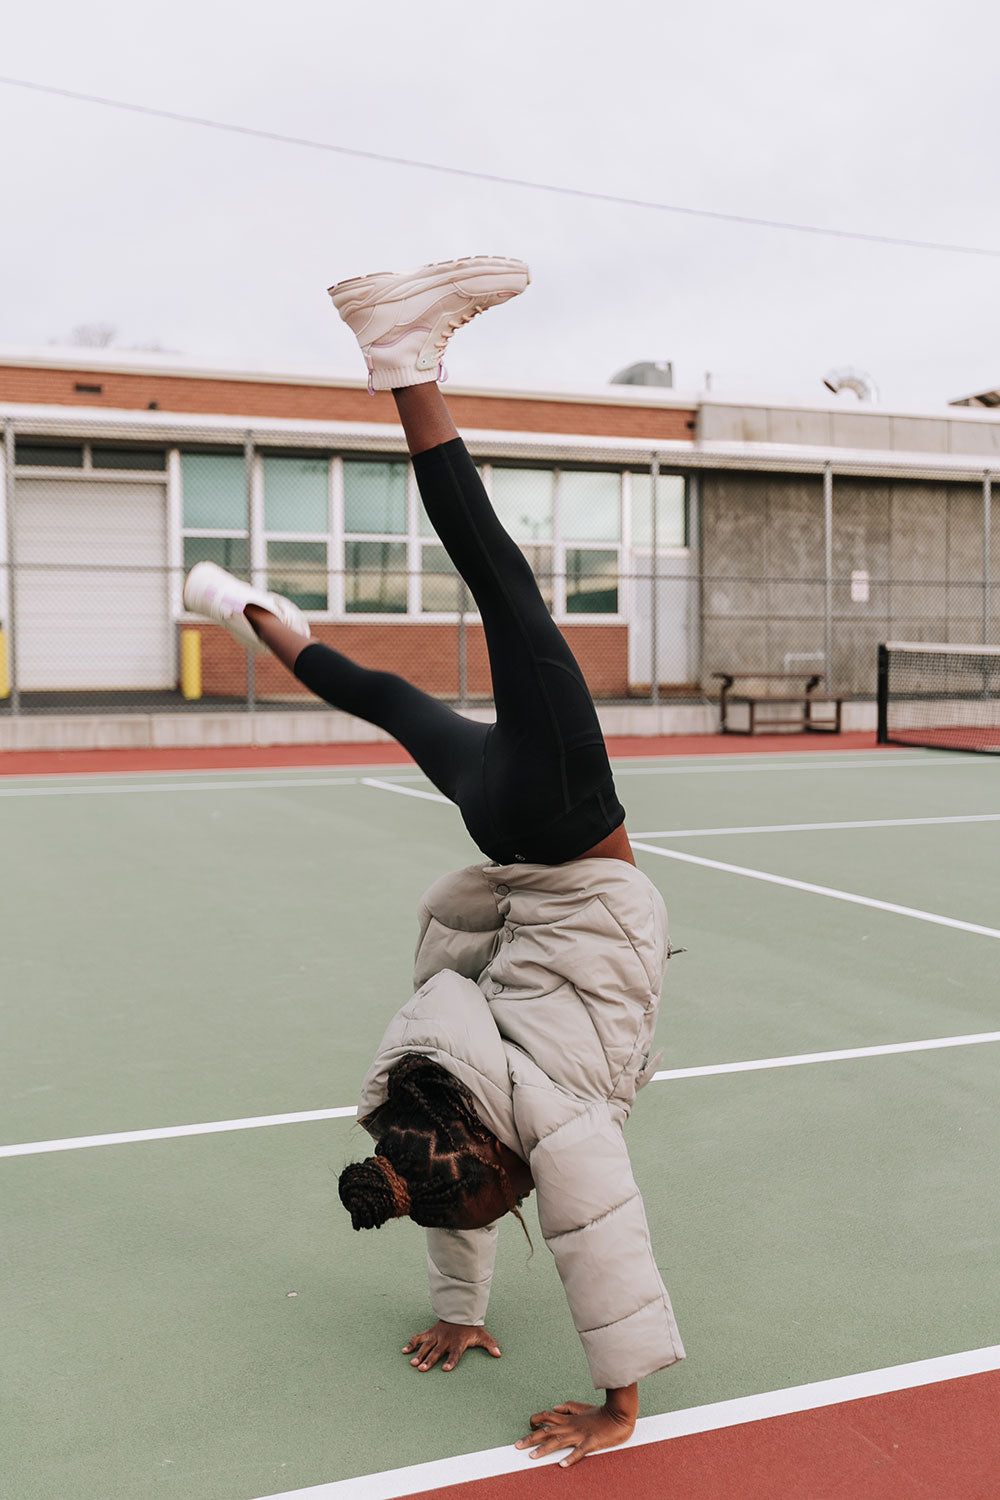 Young girl doing a handstand on a tennis court wearing Everyway kids activewear. Featuring black Longline Crop and All Day Leggings.